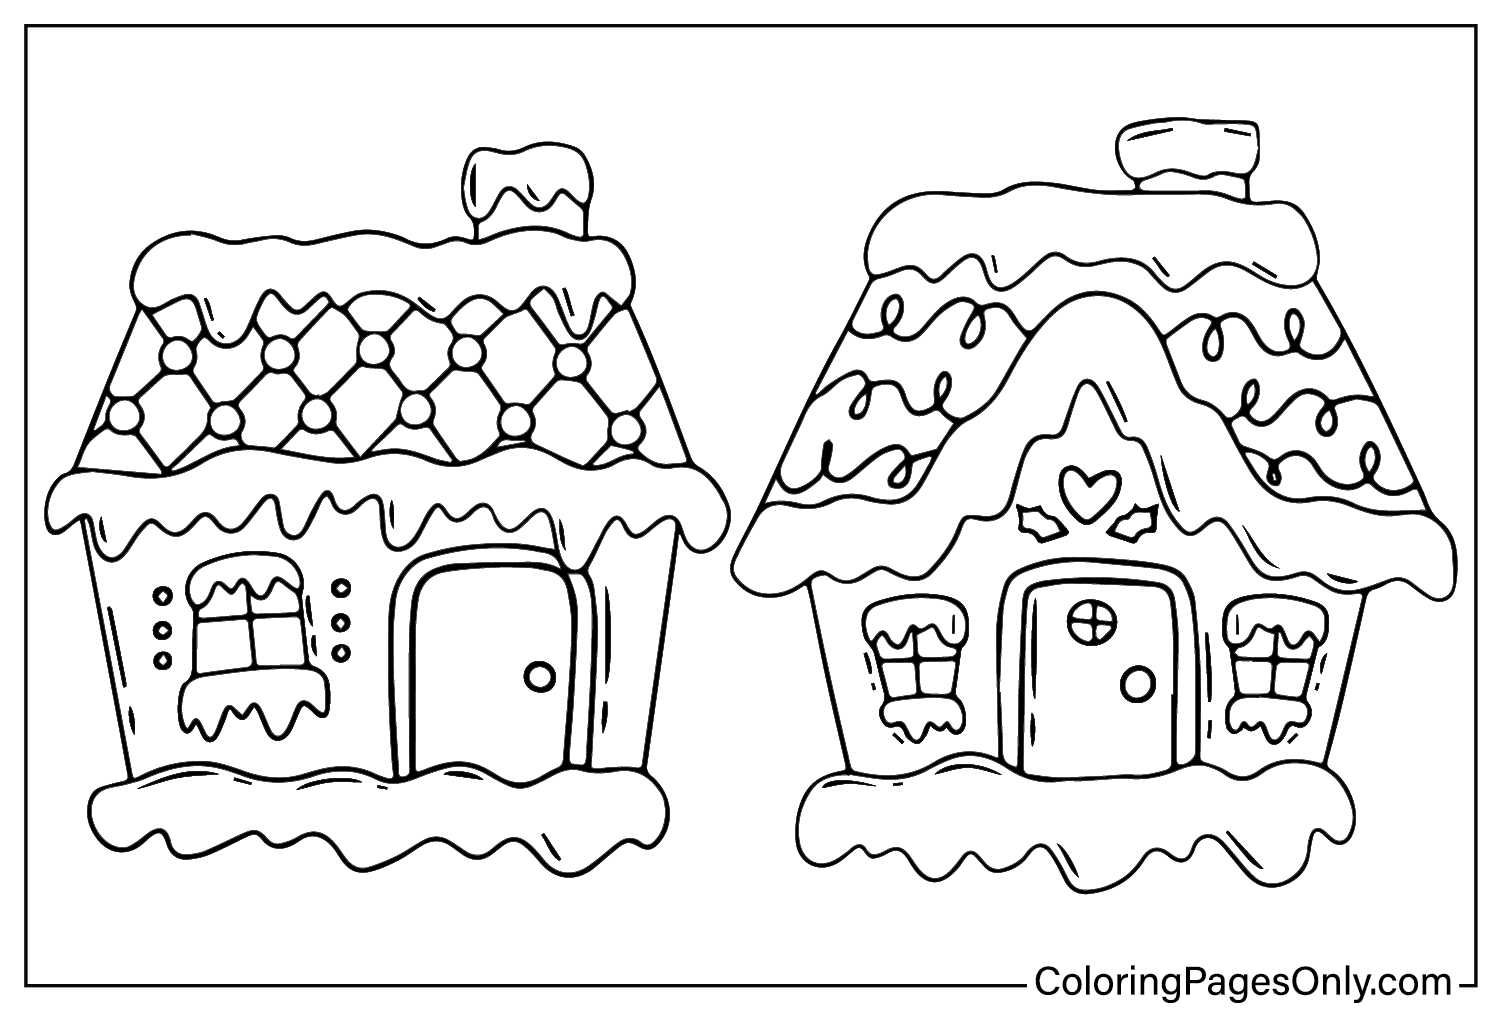 34 Free Printable Gingerbread House Coloring Pages